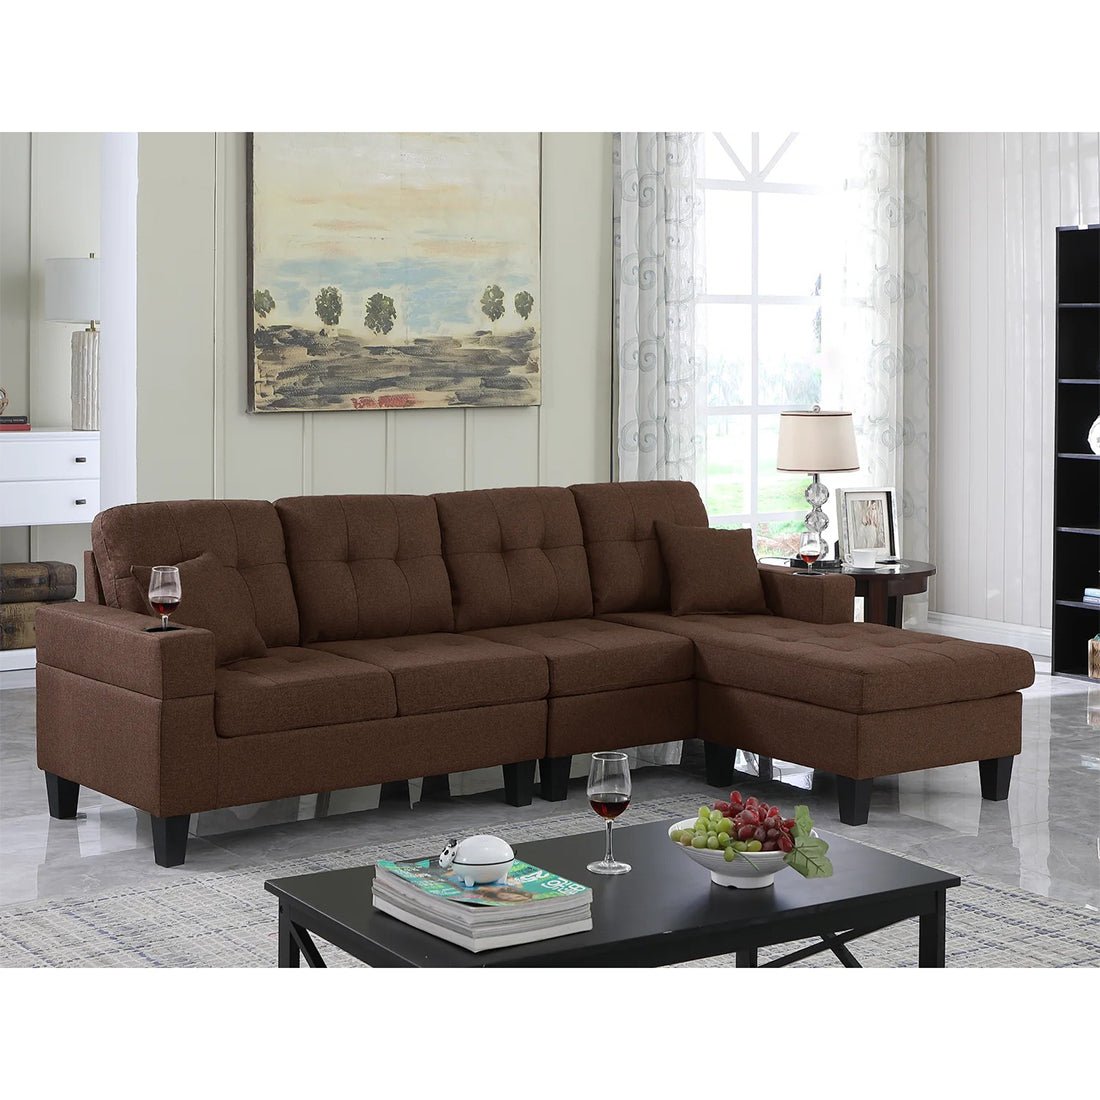 Torque - Madelyn 6 Seater Interchangeable L Shape Fabric Sofa For Living Room | Bedroom | Office - Torque India